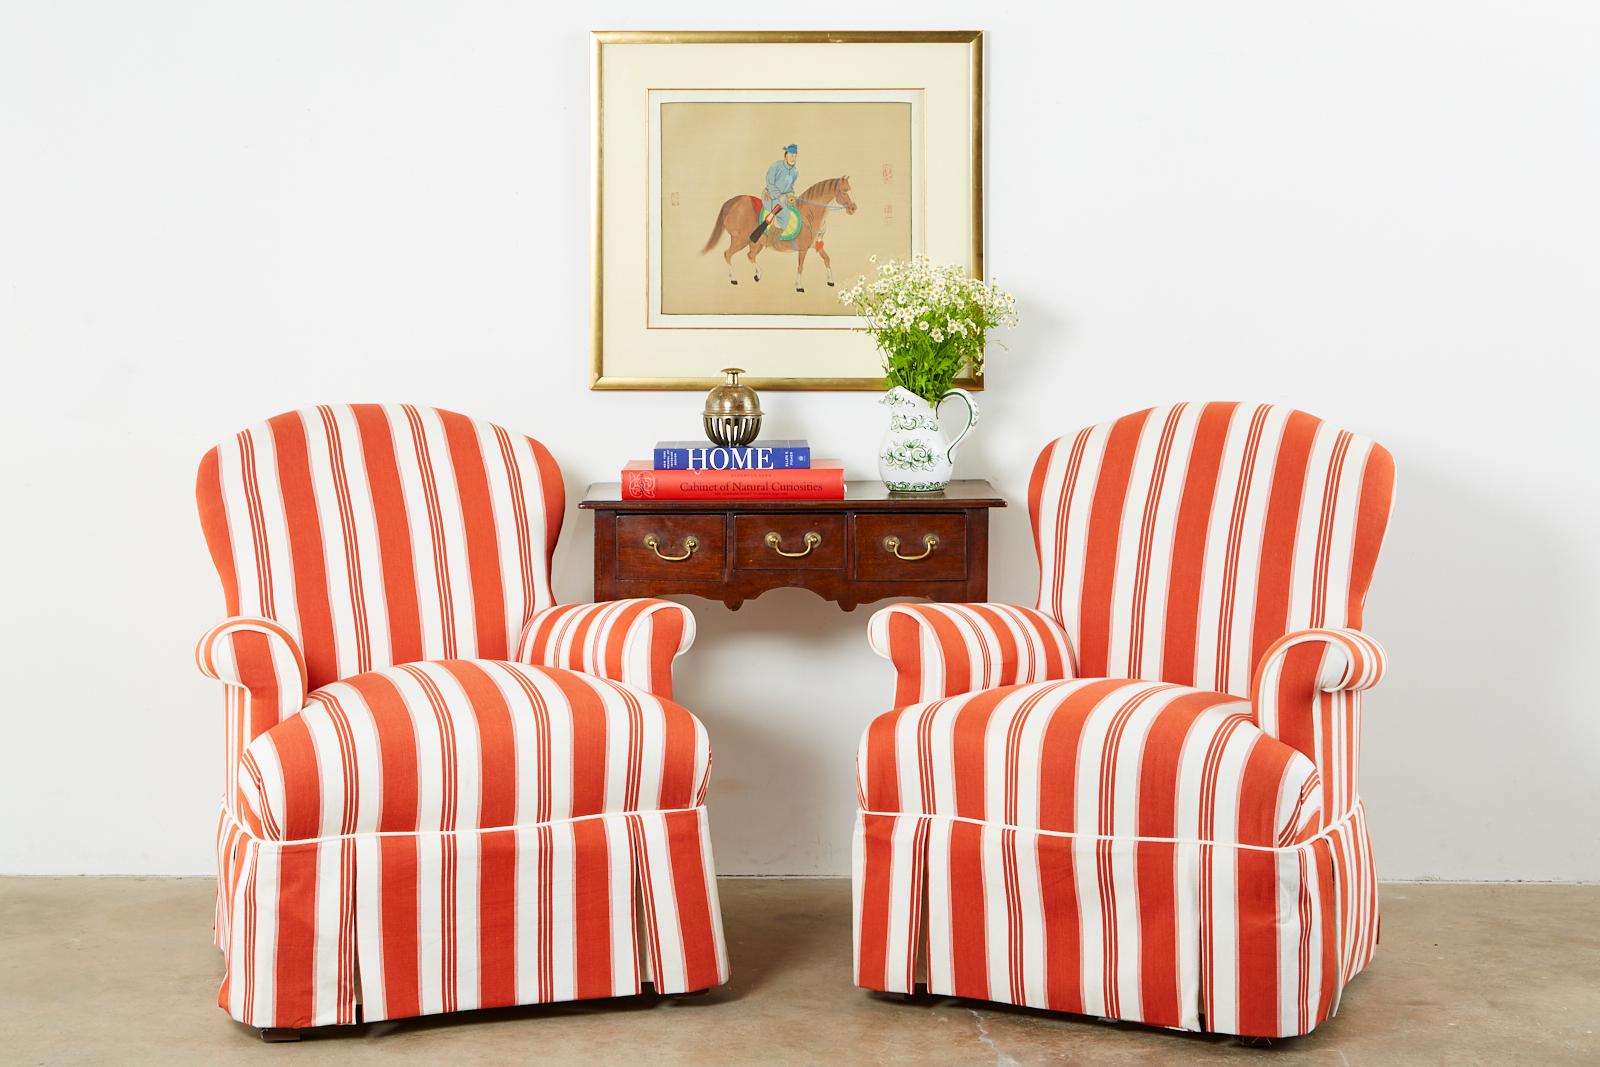 Whimsical pair of upholstered lounge chairs or club chairs featuring a striped fabric. Contemporary style with a hardwood frame. The generous seat has English style flared or rolled arms and is skirted. Like new with excellent joinery and